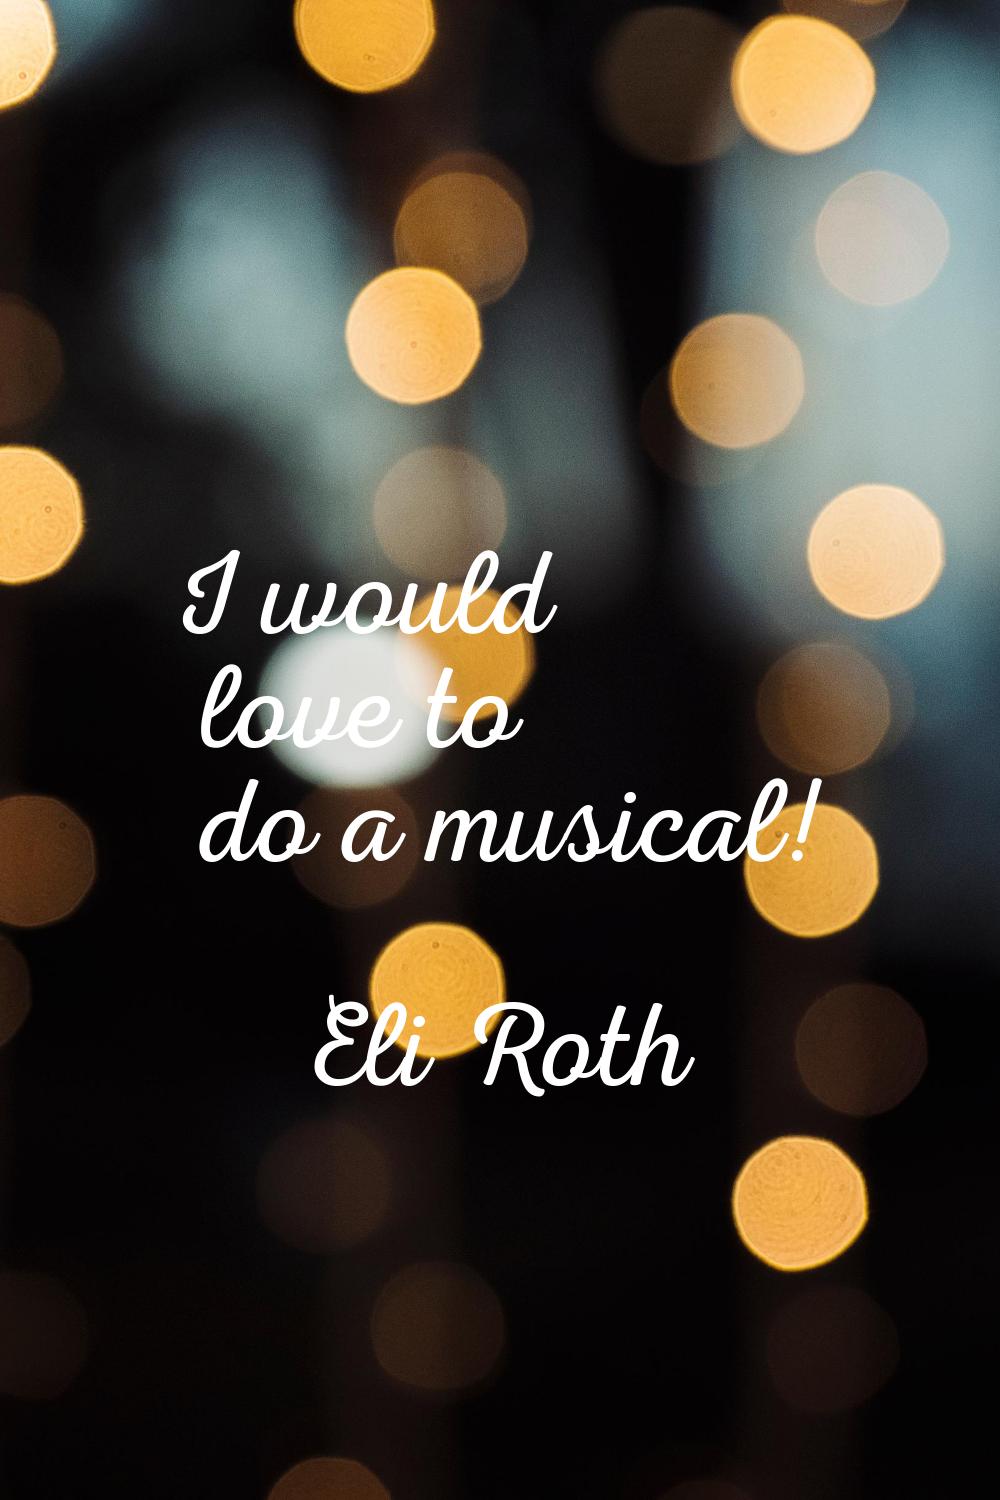 I would love to do a musical!